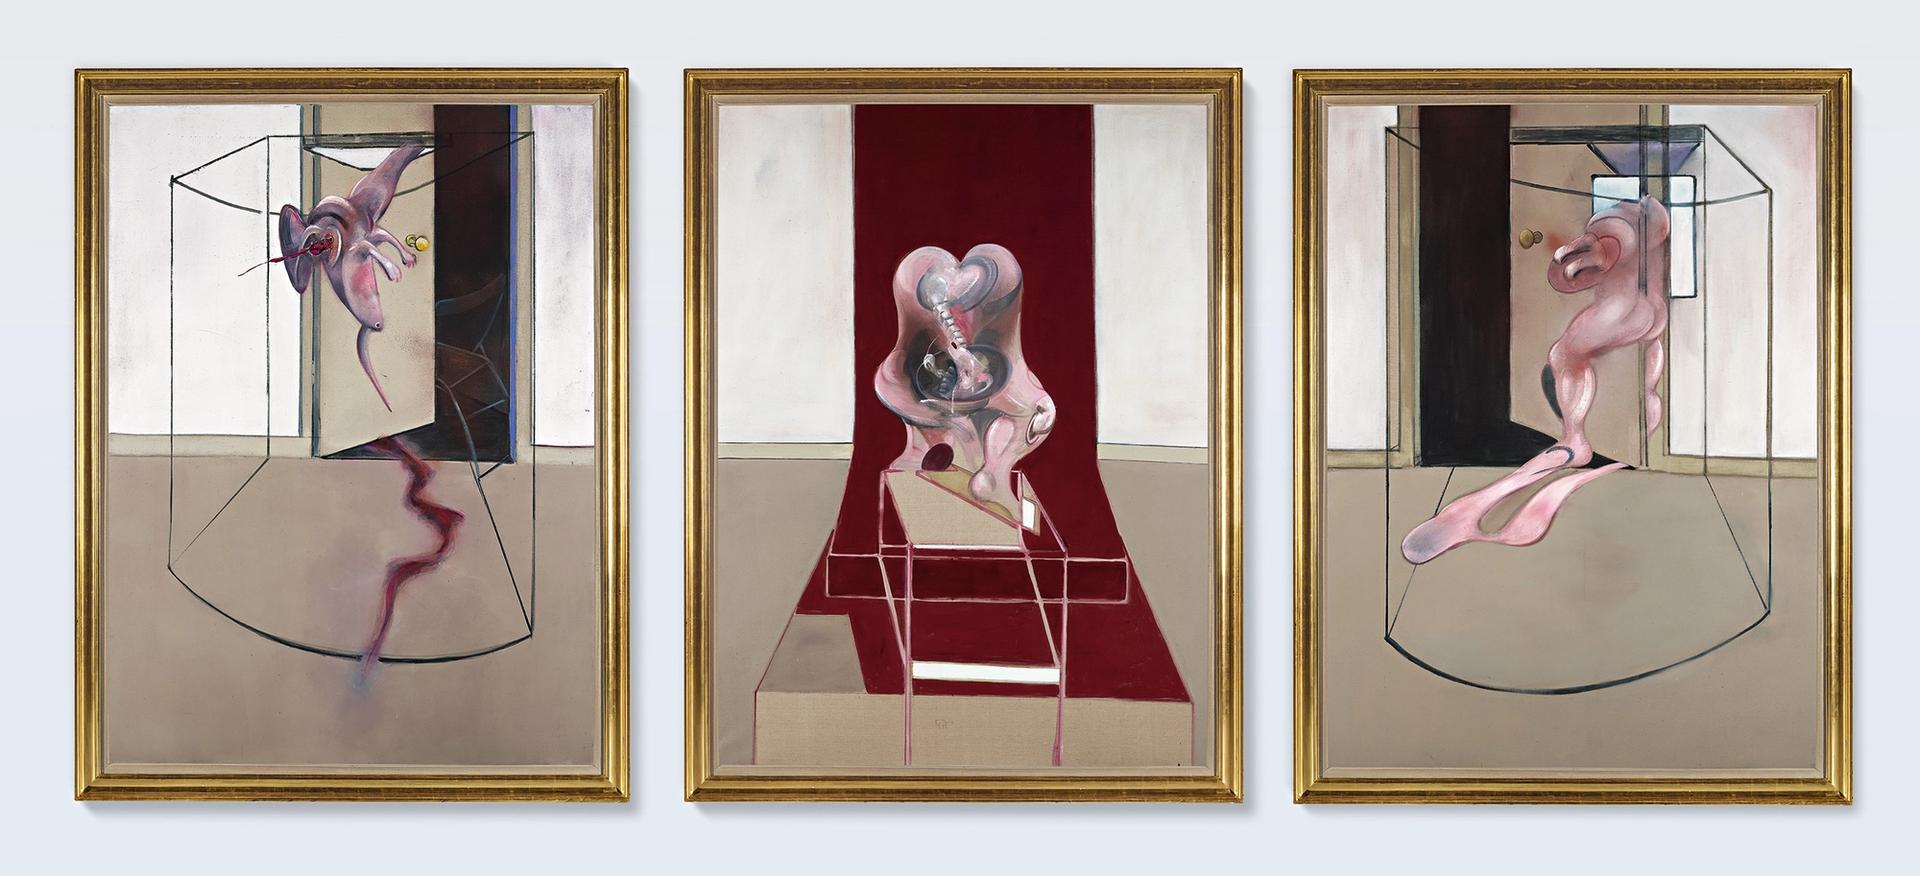 Francis Bacon, Triptych Inspired by the Oresteia of Aeschylus (1981) Image courtesy Sotheby's